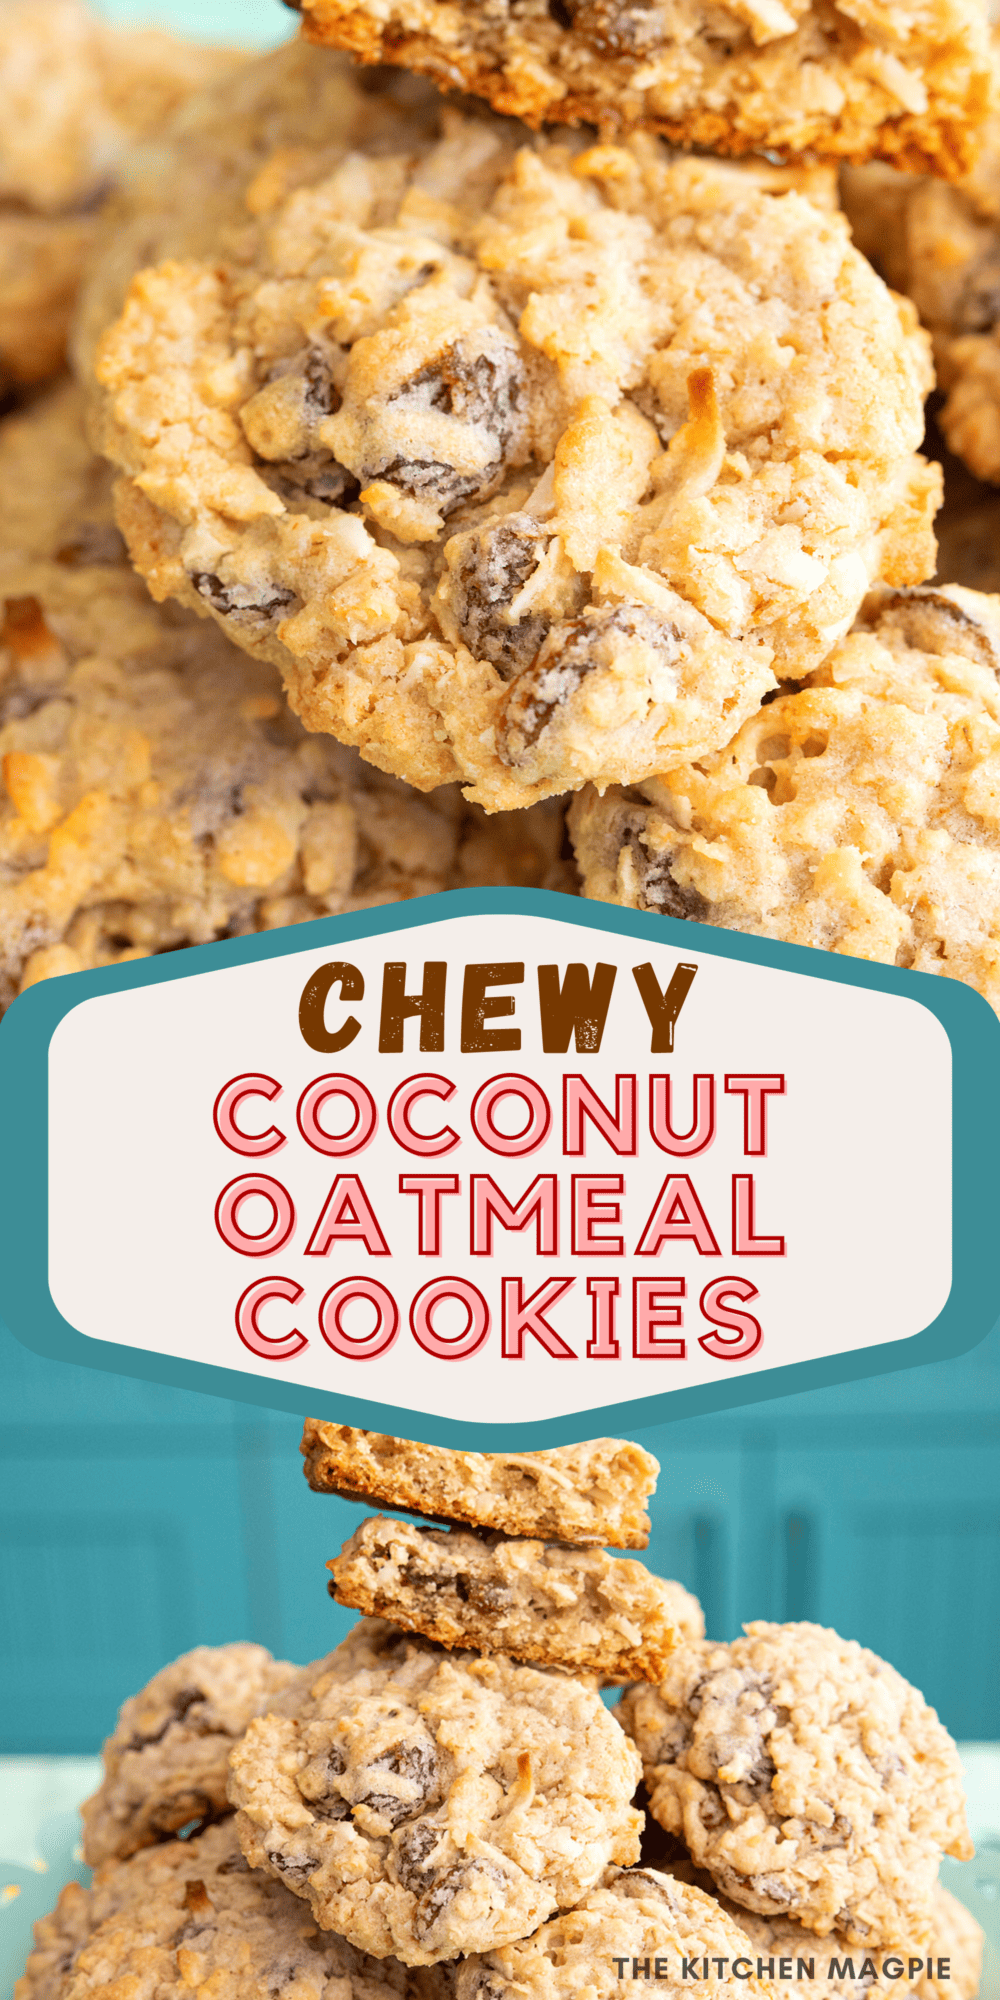 Deliciously chewy cookies loaded with coconut flakes, raisins, and oatmeal.  Try chocolate chips instead of raisins for a chocolate treat! 